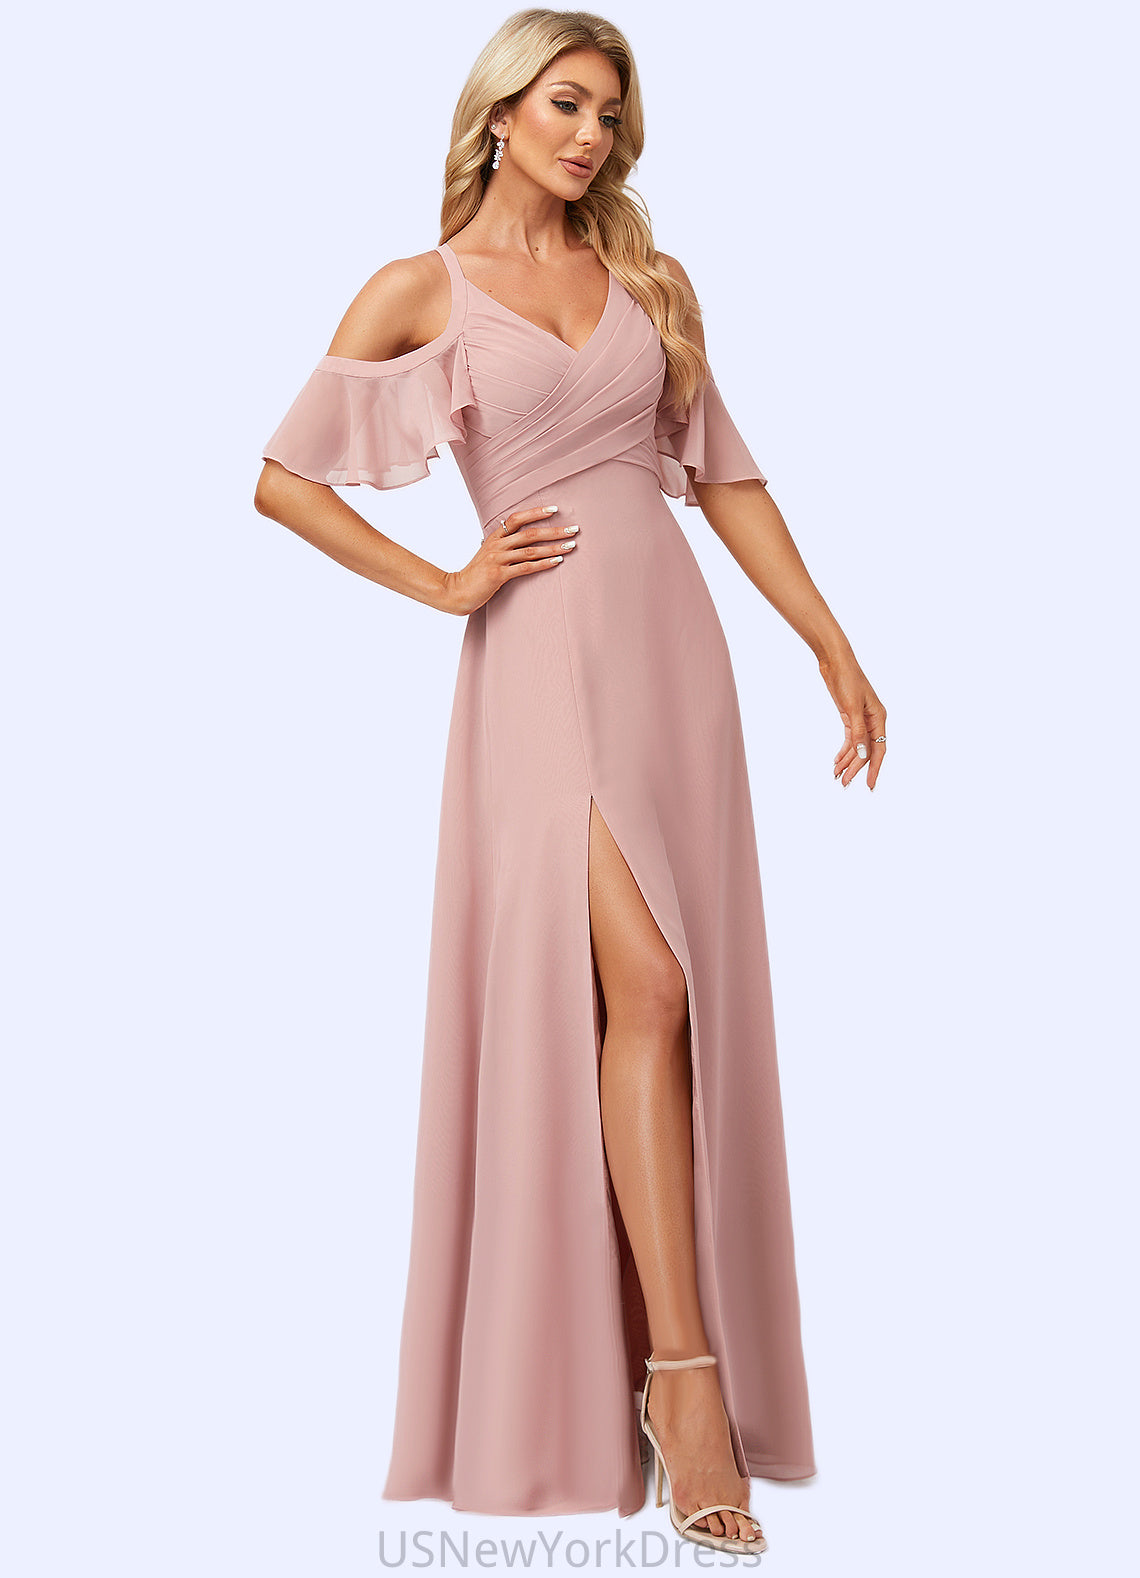 Frederica A-line Cold Shoulder Floor-Length Chiffon Bridesmaid Dress With Ruffle DJP0022599